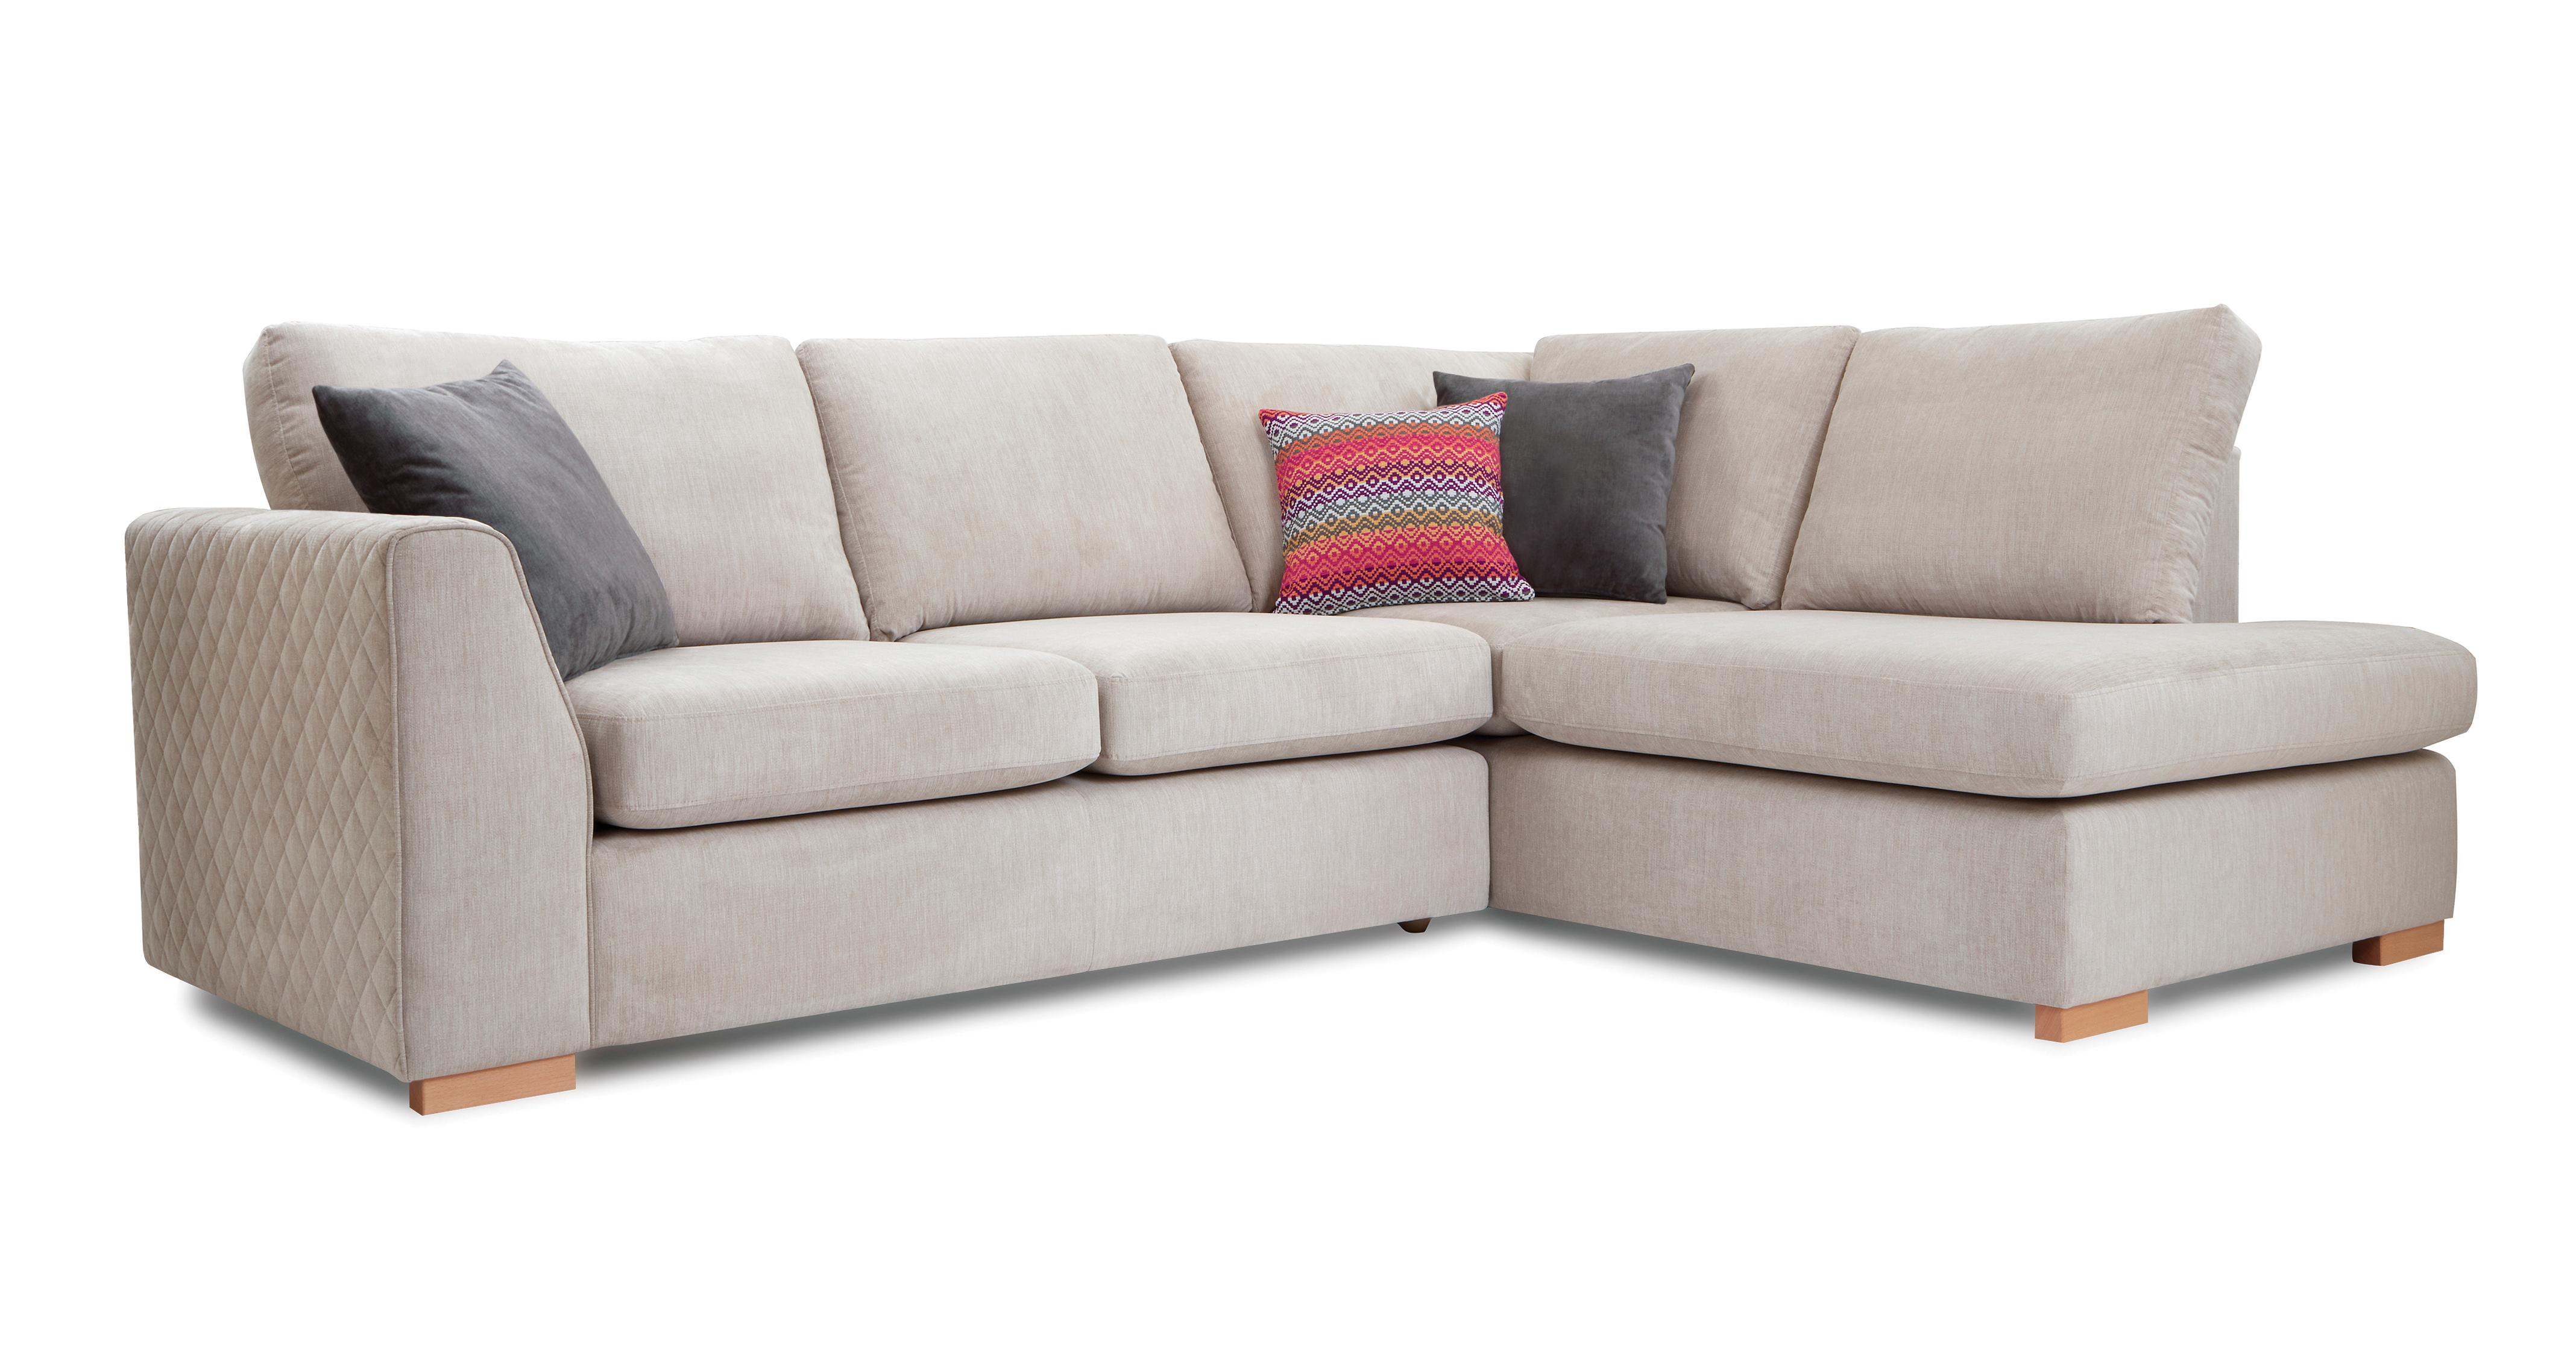 Beige off white corner sofa with gray pillows